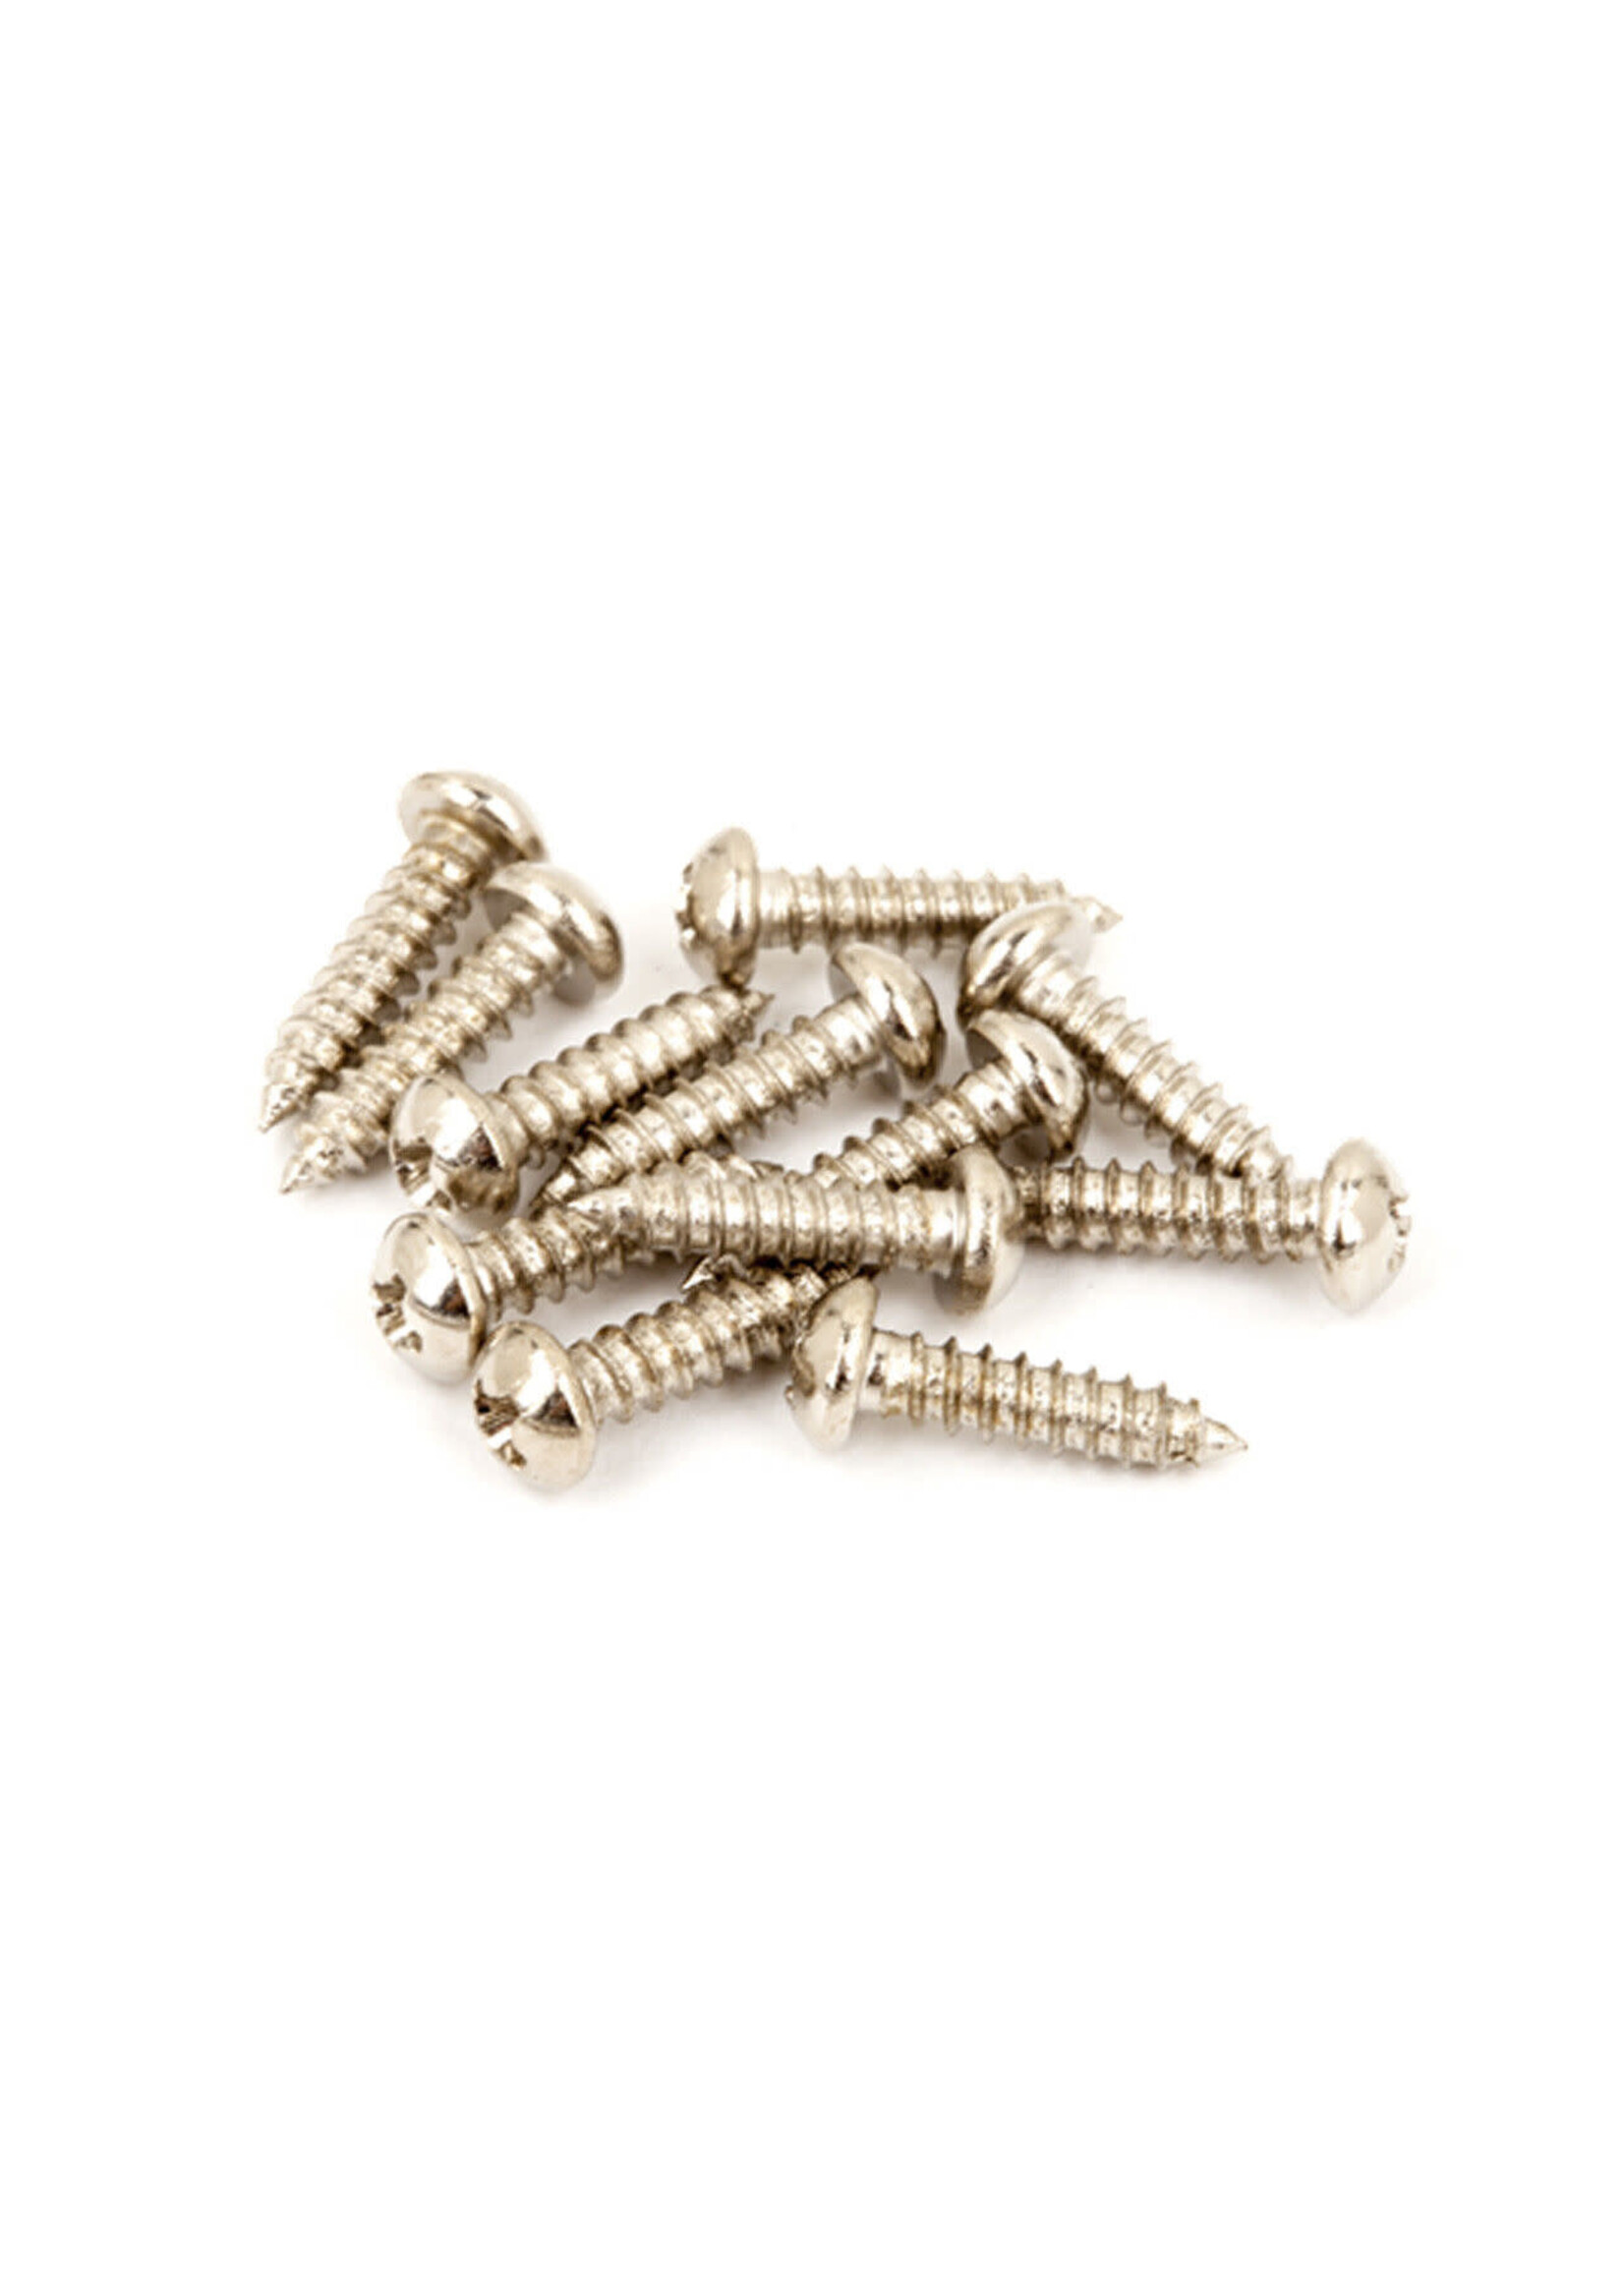 FENDER Fender Pure Vintage Tuning Machine Mounting Screws, Nickel-Plated, (12) + $5 Shipping